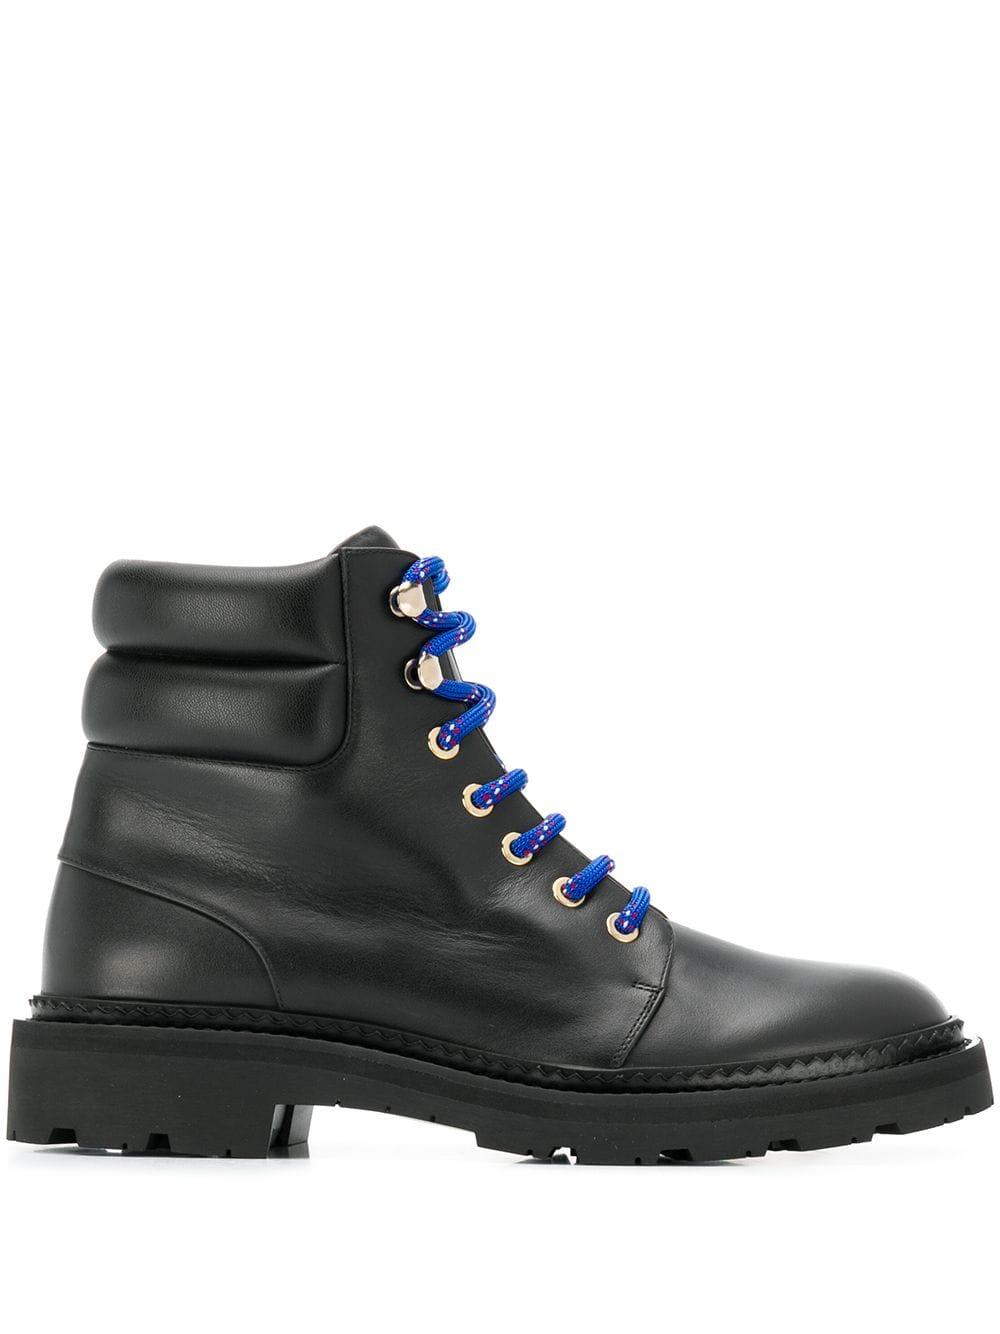 Bally Leather Ankle Lace-up Boots in Black - Lyst